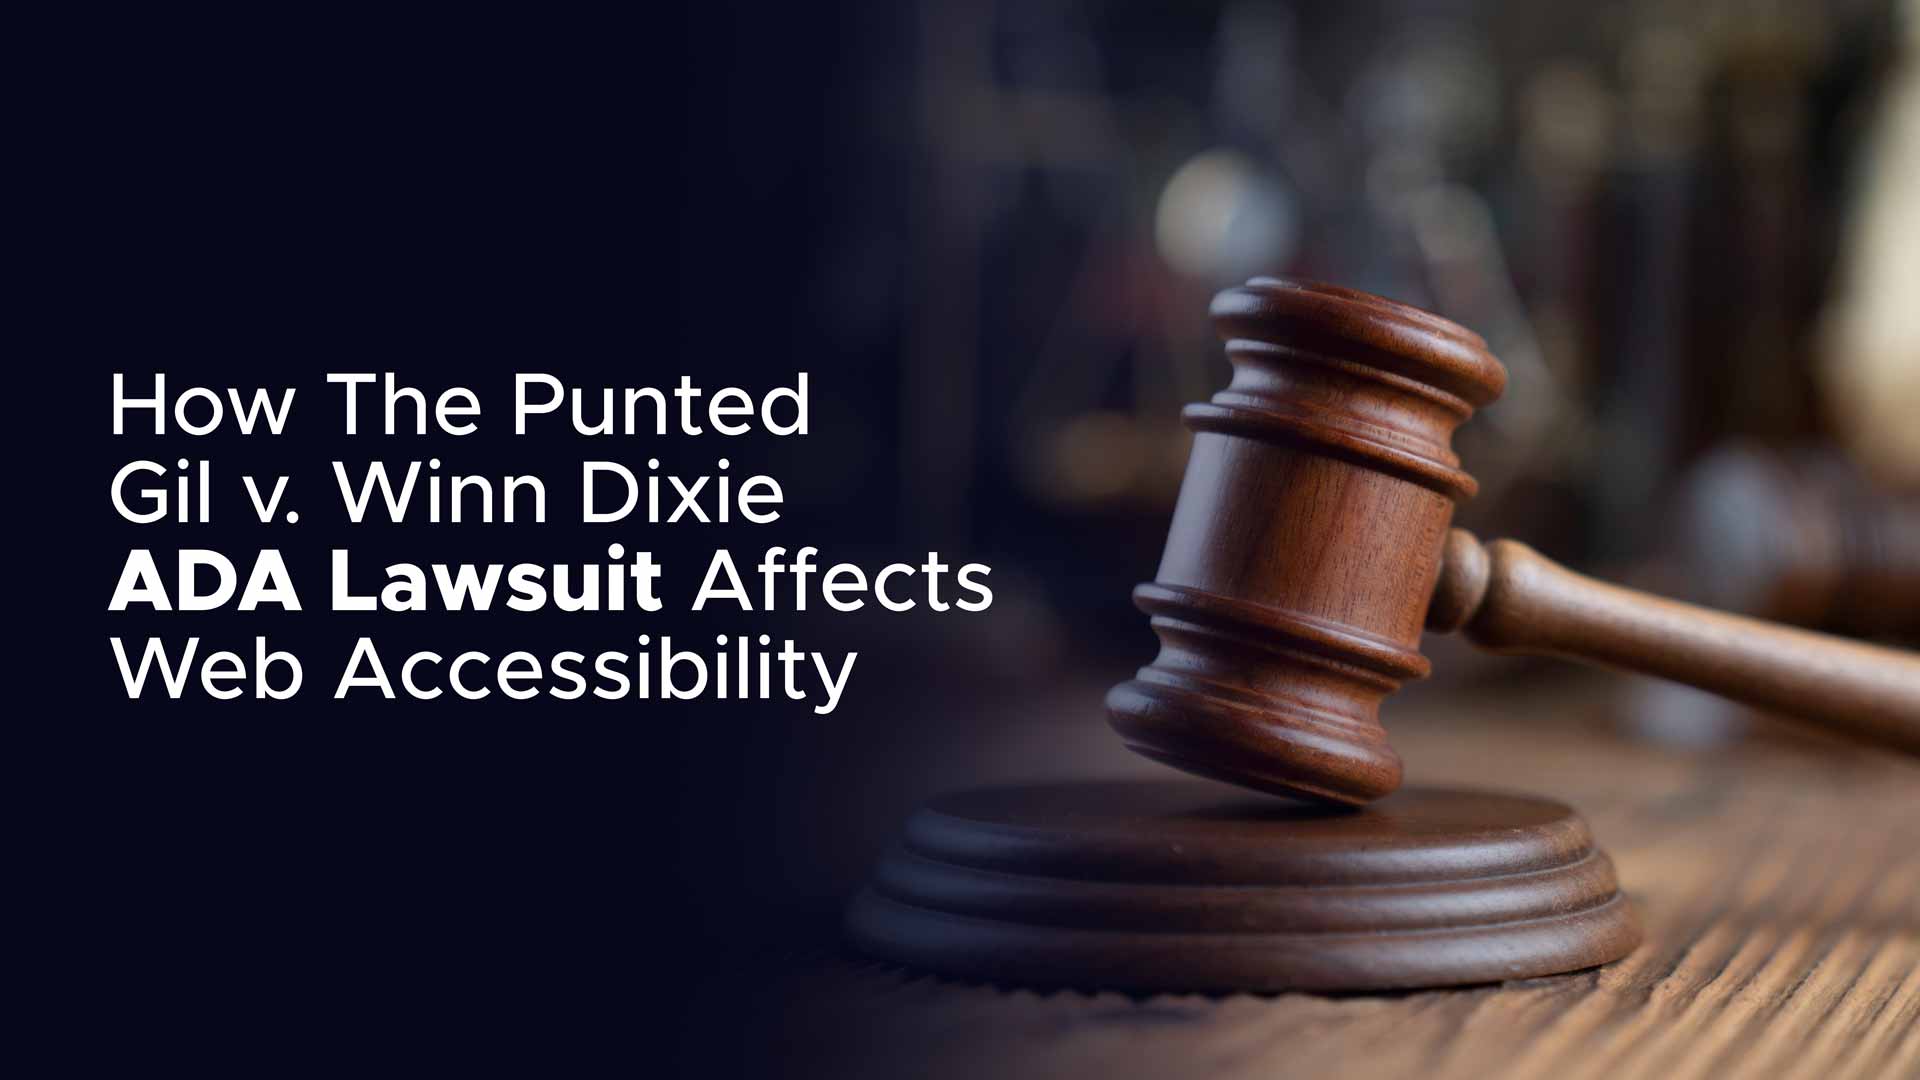 How The Punted Gil vs. Winn Dixie ADA Lawsuit Affects Your Web Accessibility